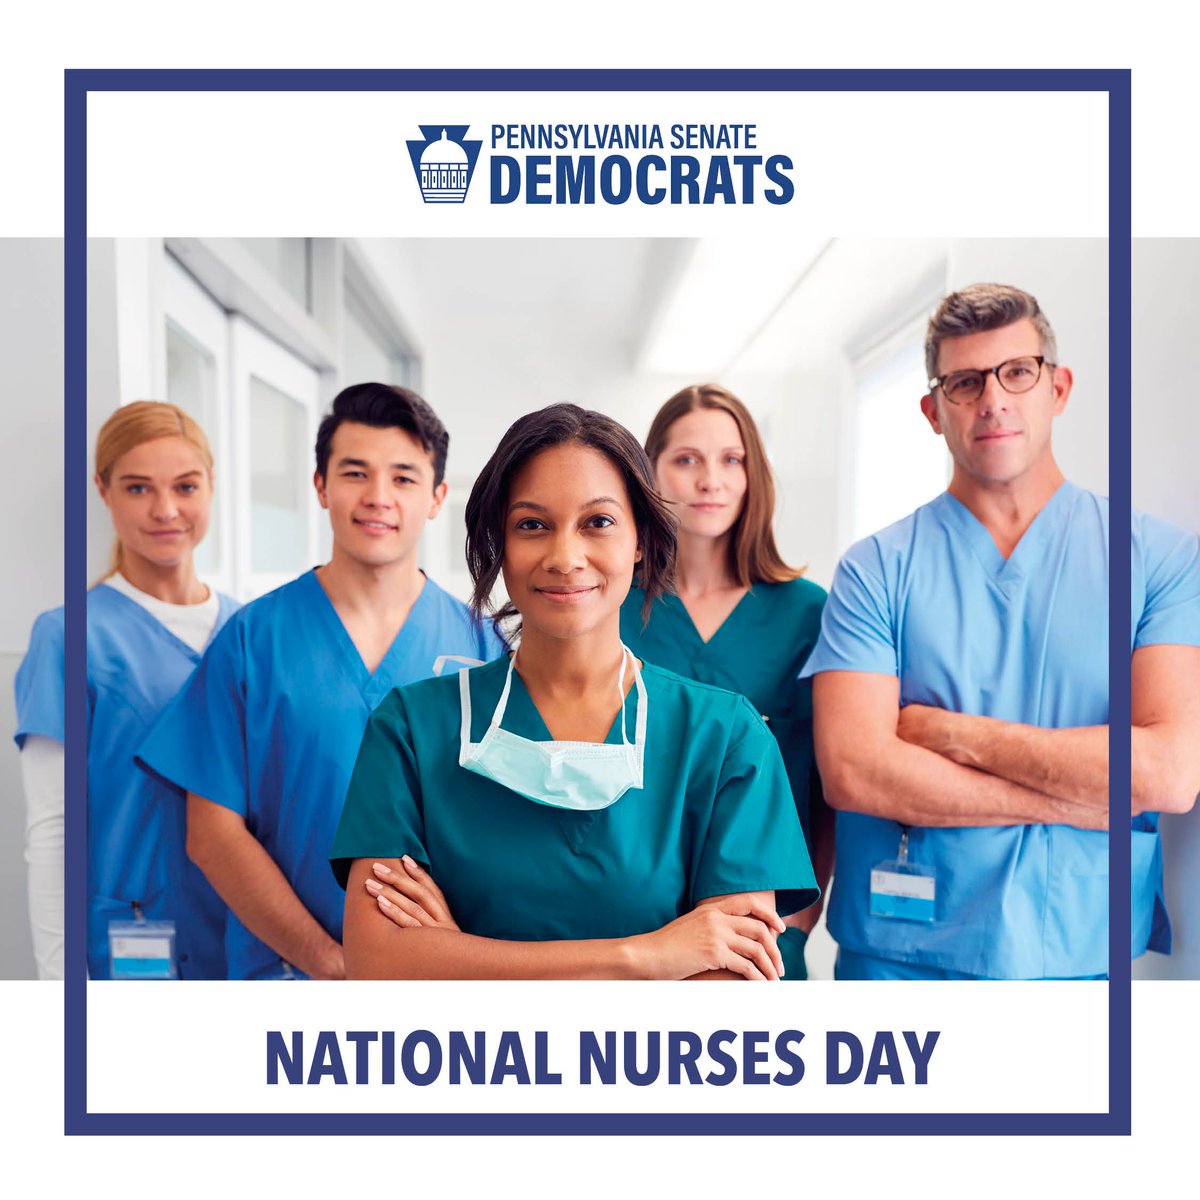 Happy National Nurses Day! 👩🏽‍⚕️ 🩺 Let's take a moment to express our gratitude to these healthcare heroes. Thank you for all that you do, today and every day! #NationalNursesDay #ThankANurse